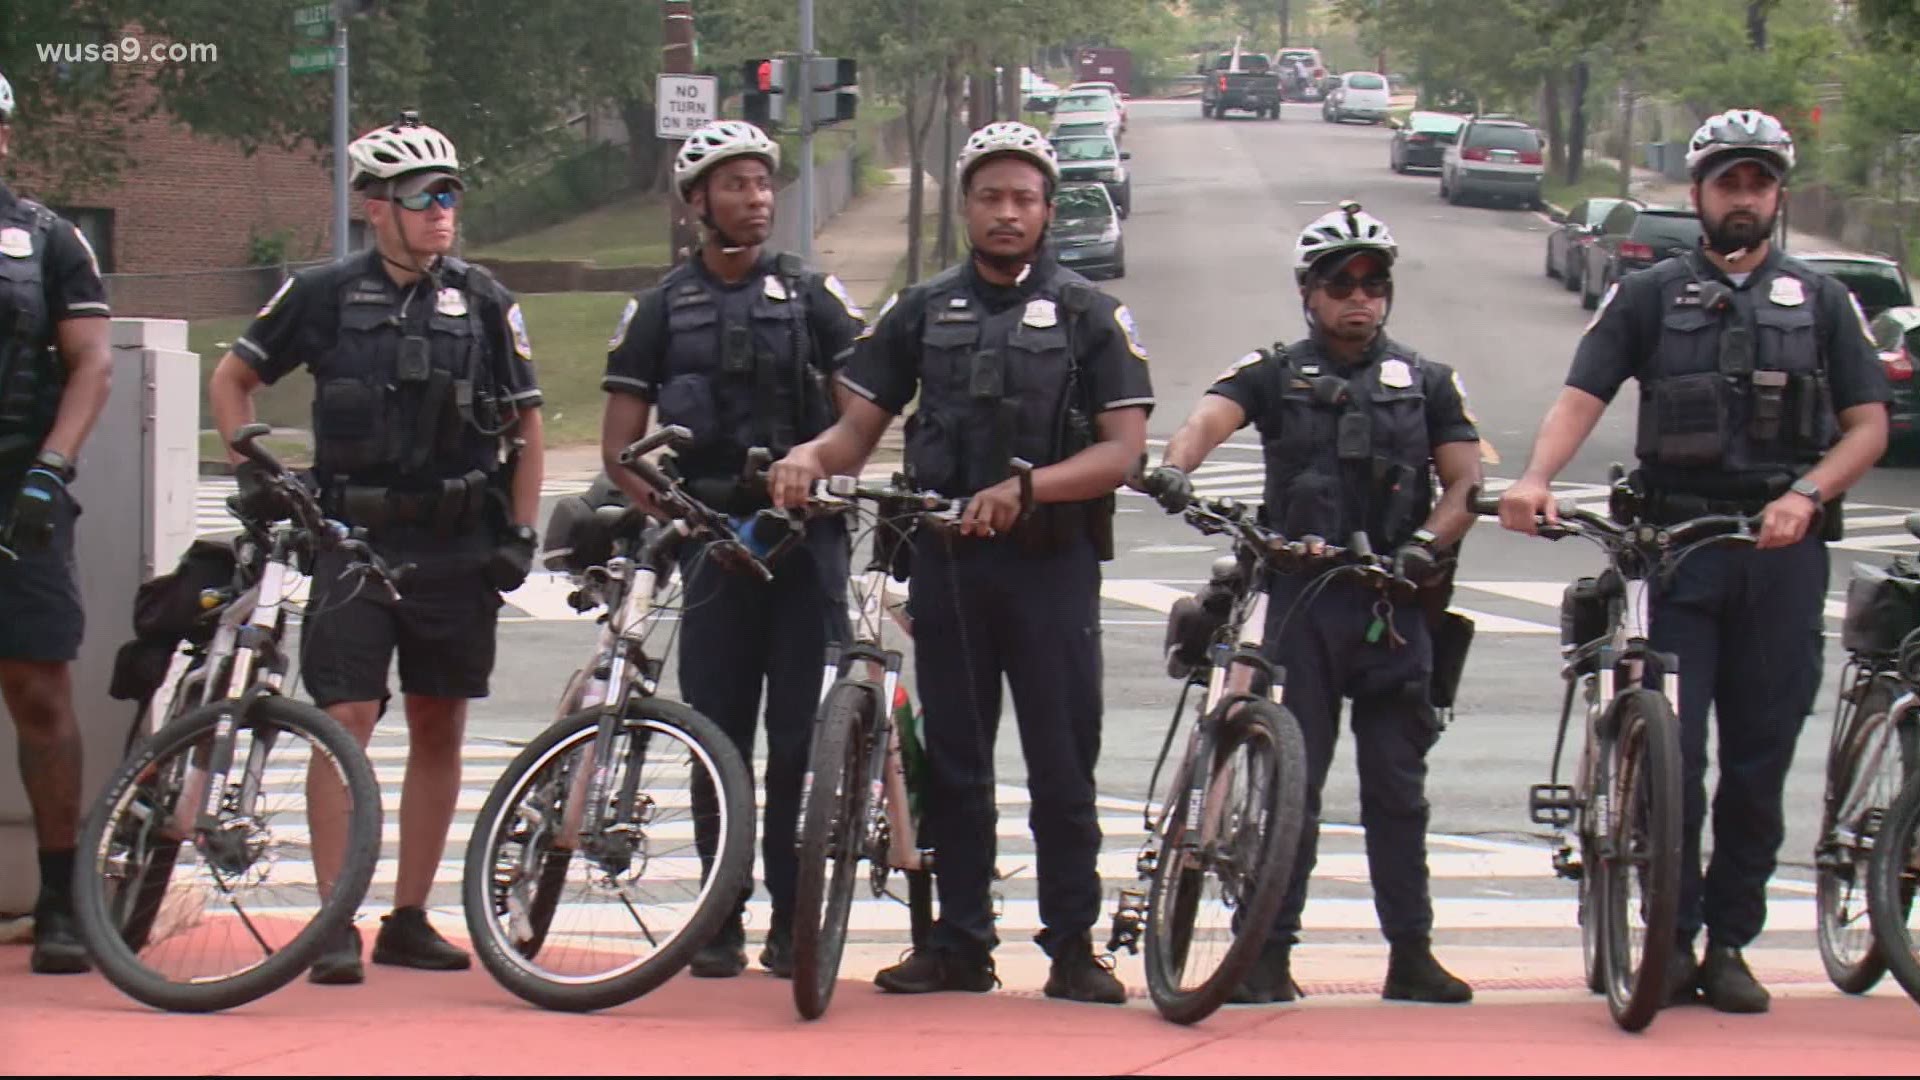 The patrol unit will be primarily deployed on mountain bikes and scooters.